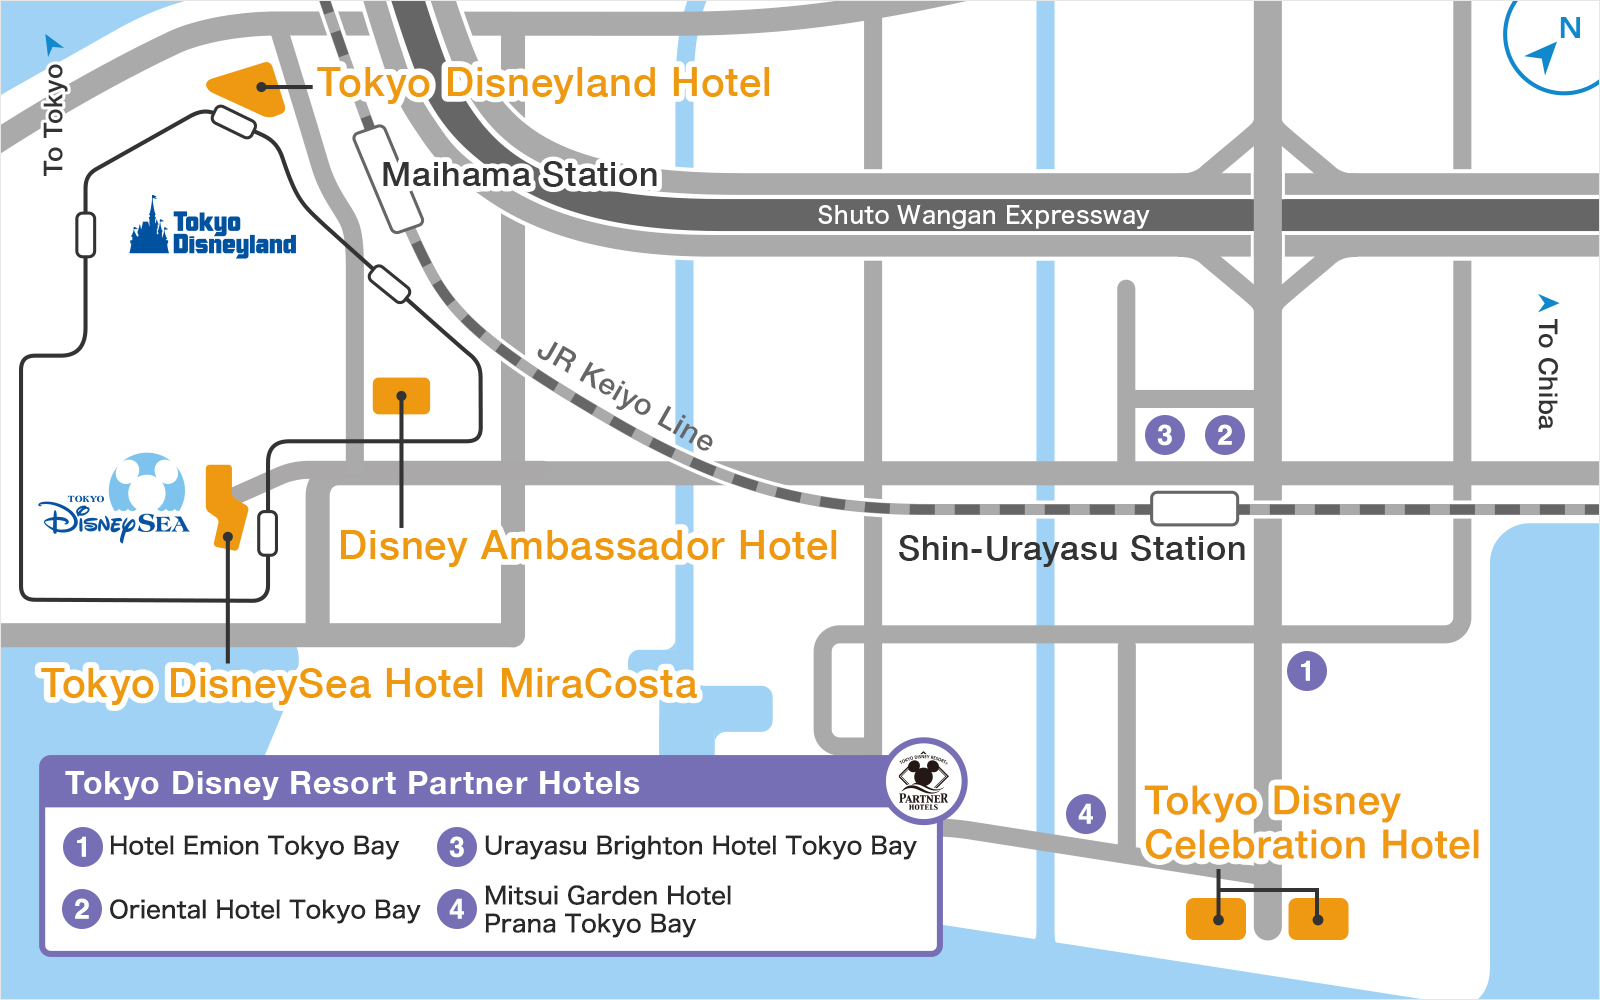 General location of the hotels